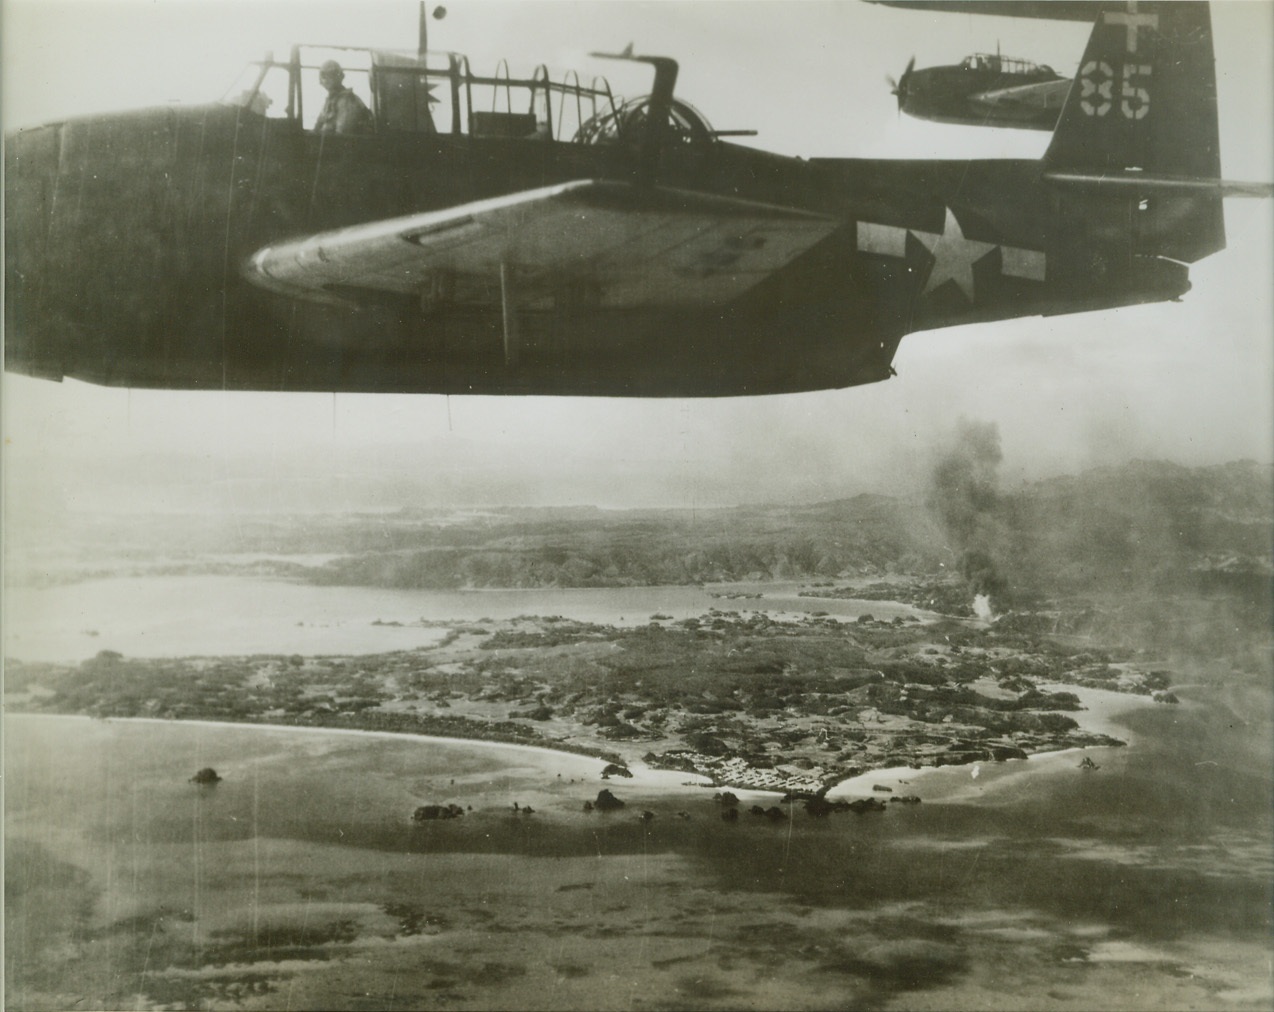 Yank Planes Strike at Ryukyu Islands, 10/18/1944. RYUKYU ISLANDS -- Carrier-based torpedo-bombers from air fleet of Pacific Fleet's great task force range over targets on Okinawa Island in the Ryukyu group which they have bombed and set aflame. U.S. Navy Photo. Credit: (ACME);